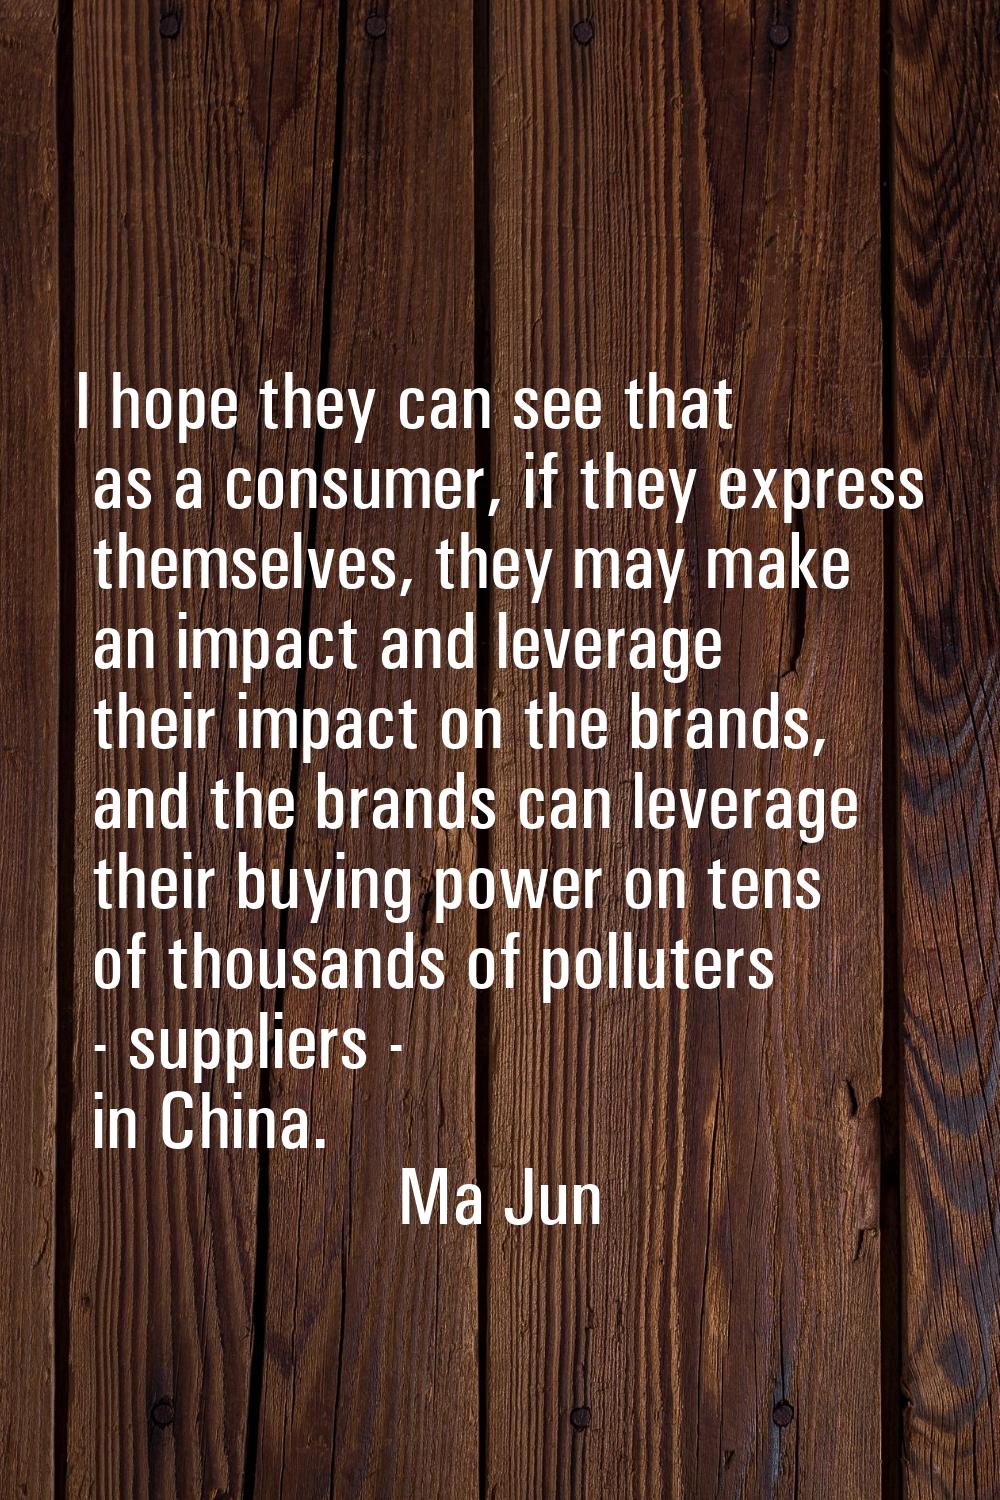 I hope they can see that as a consumer, if they express themselves, they may make an impact and lev